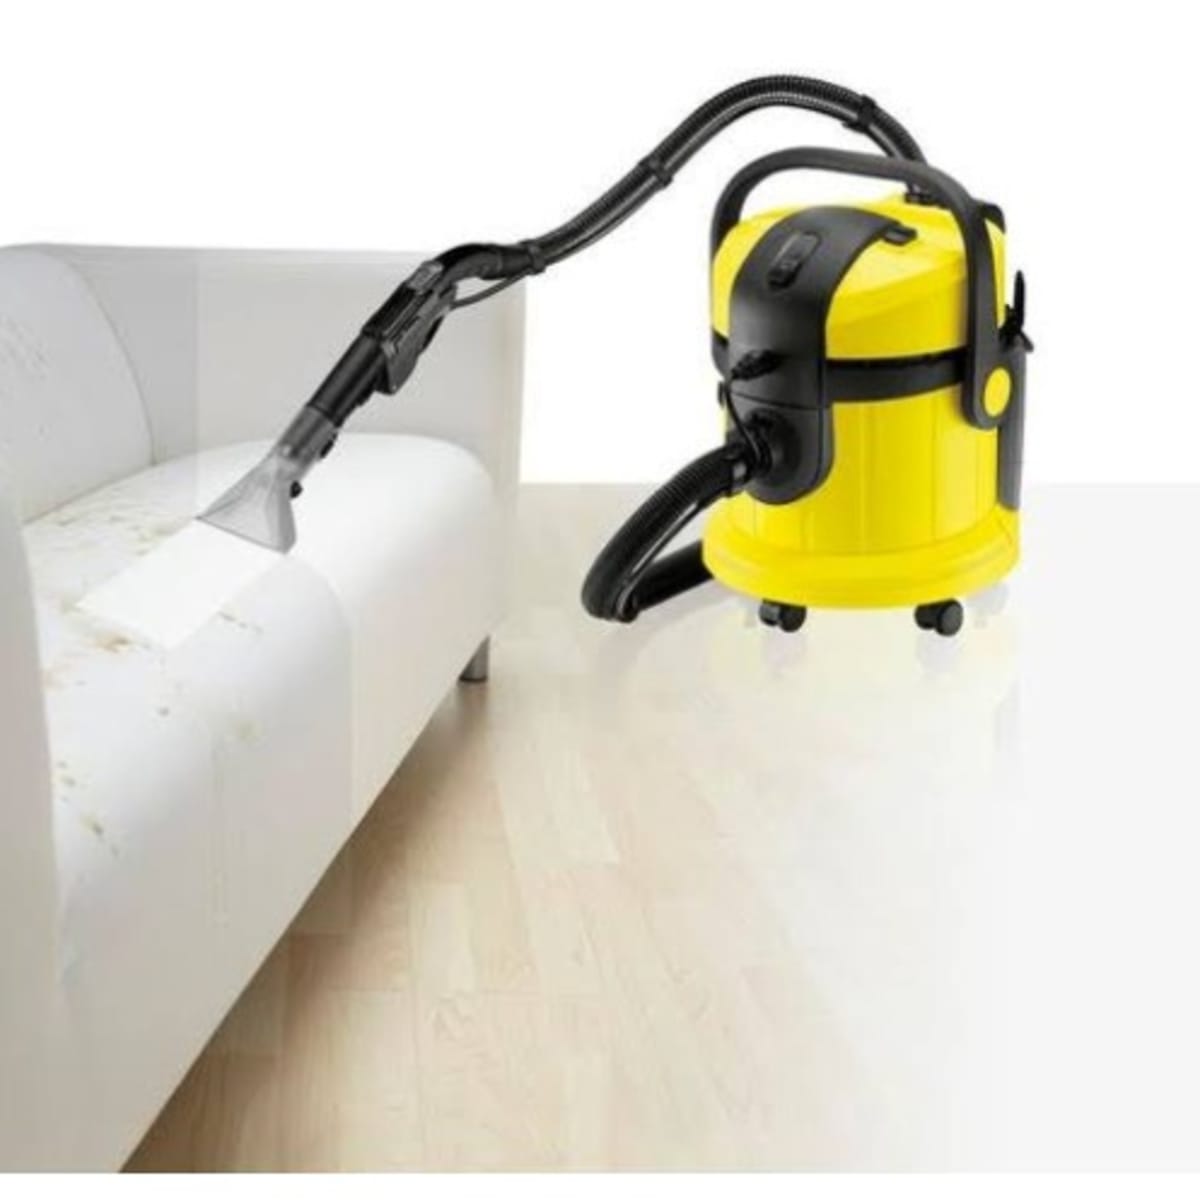 SE 4001 Spray Etxraction Cleaner  The Kärcher SE 4001 spray extraction  cleaner is a 3-in-1 master 1. Deep cleans carpets, chairs, mattresses 2.  Cleans hard floors 3. Functions as a wet